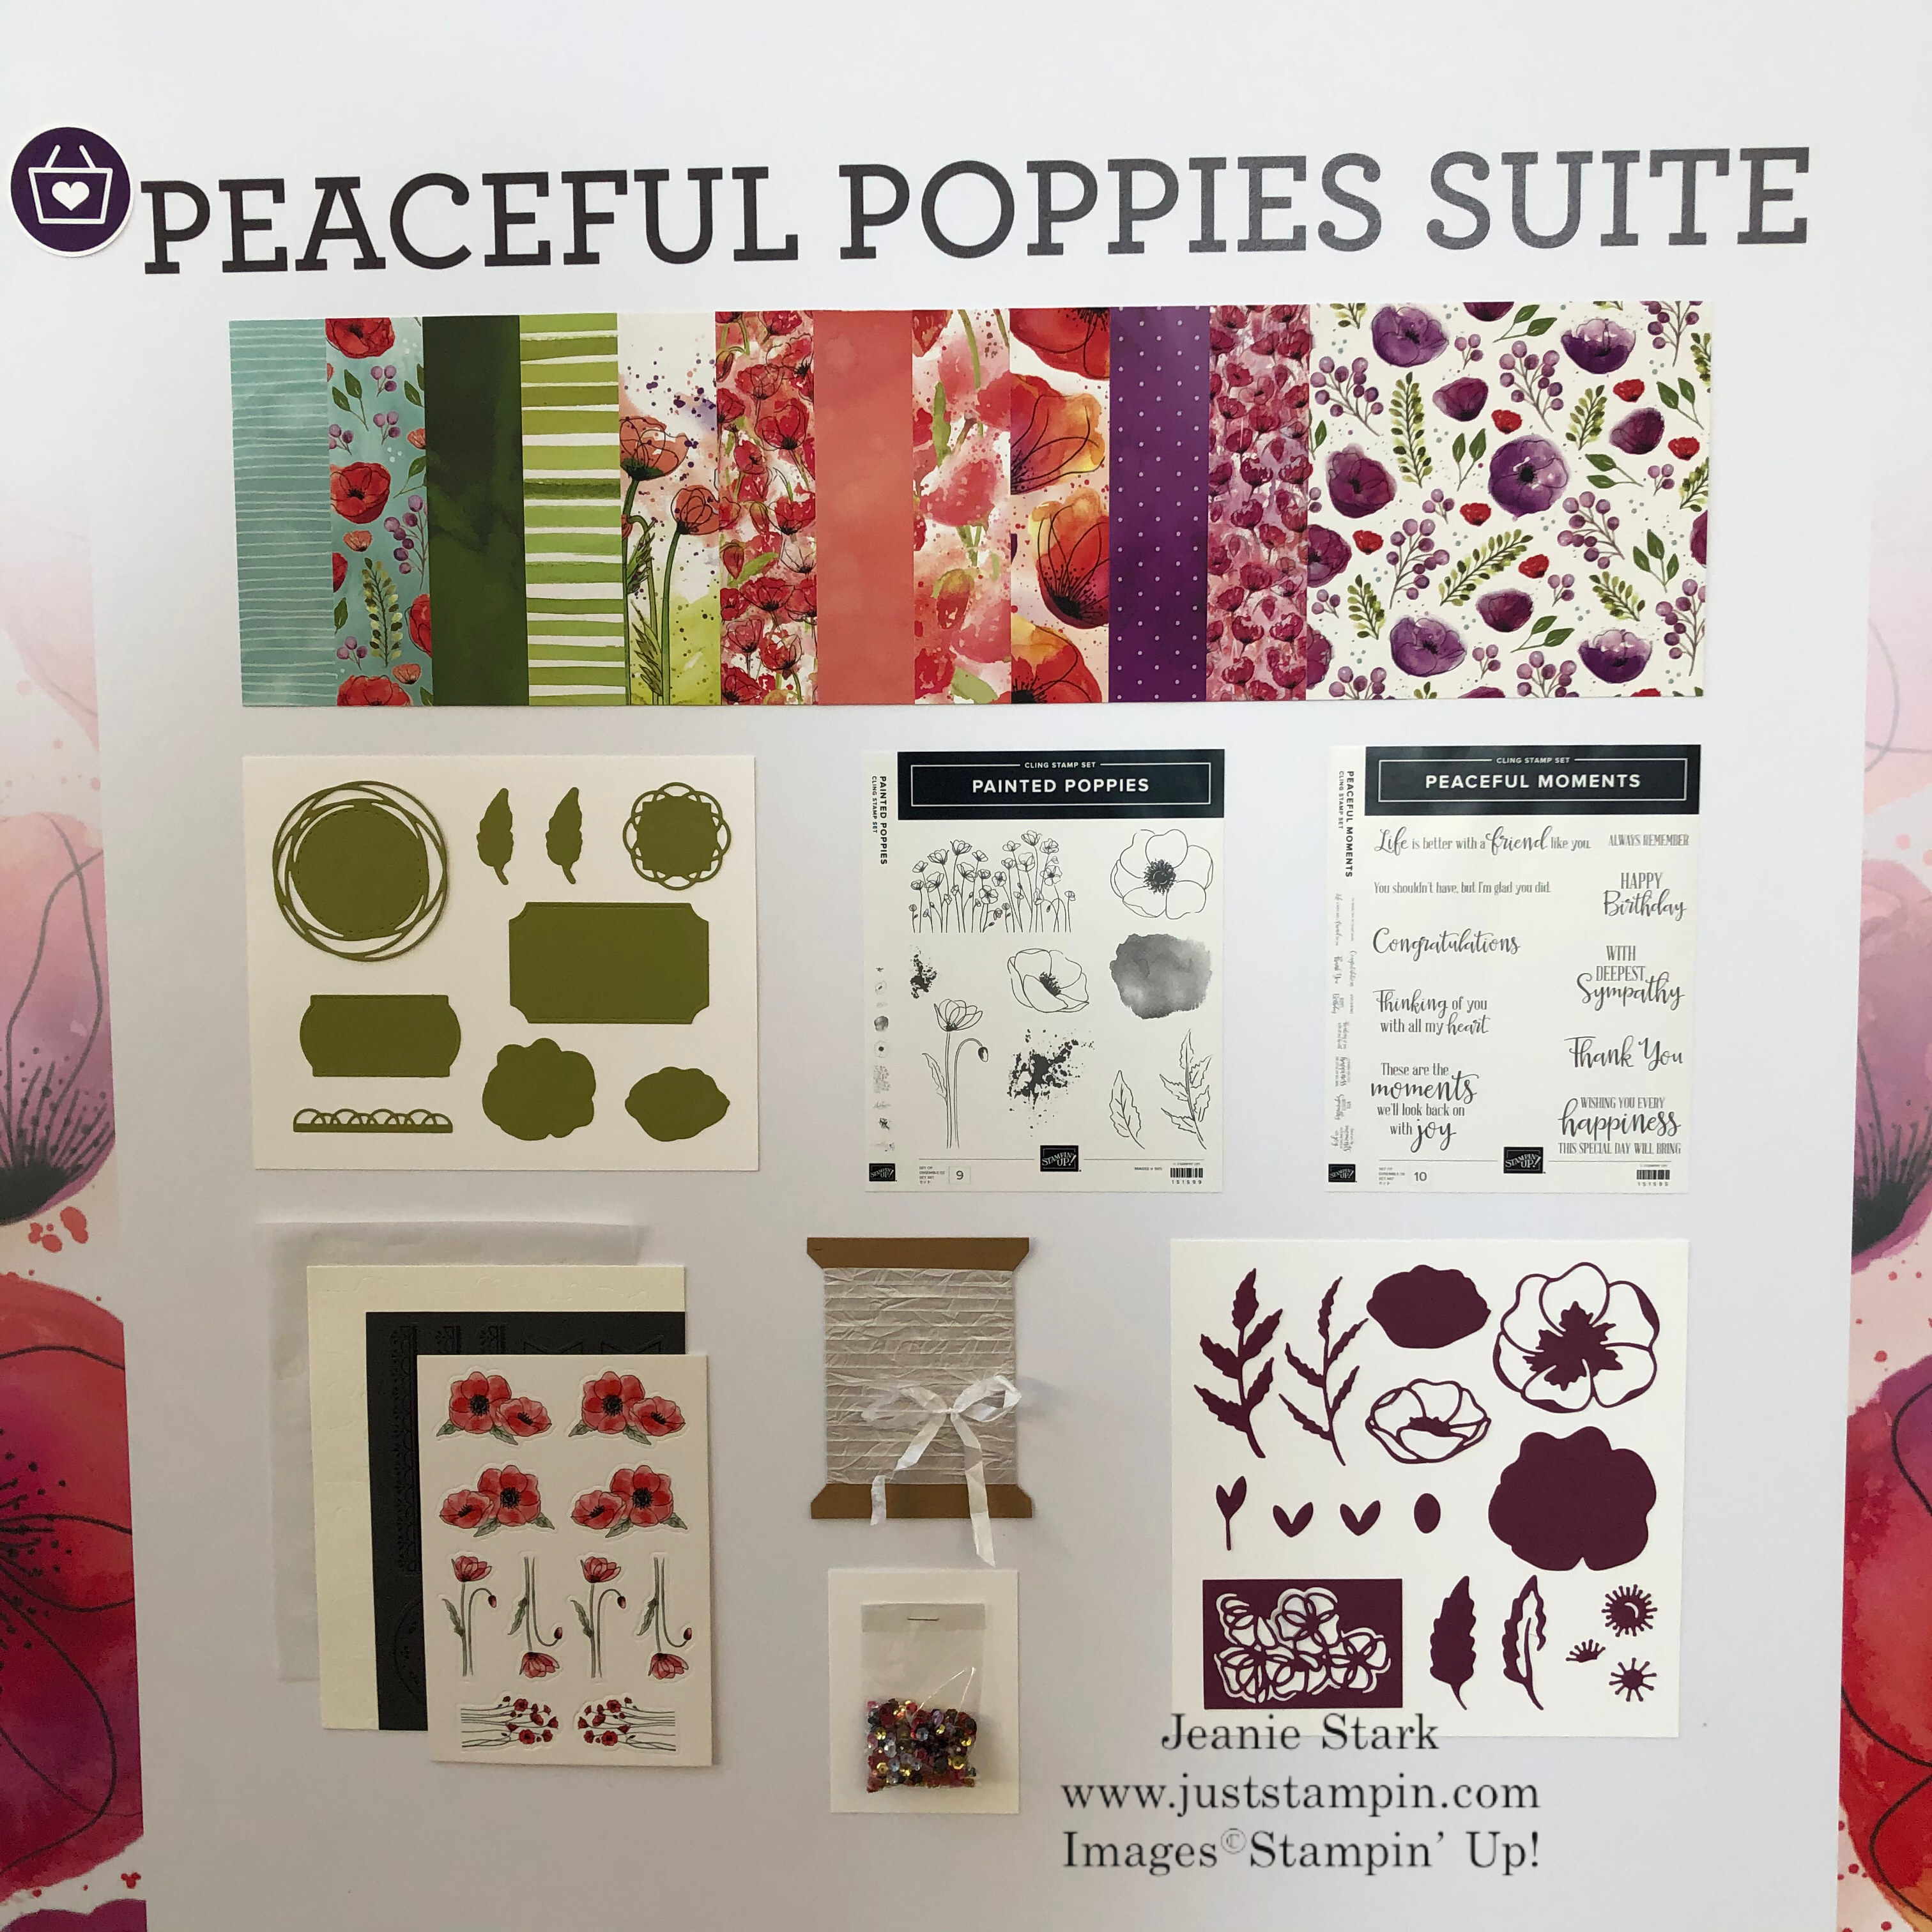 Stampin' Up! Peaceful Poppies Suite - Jeanie Stark StampinUp